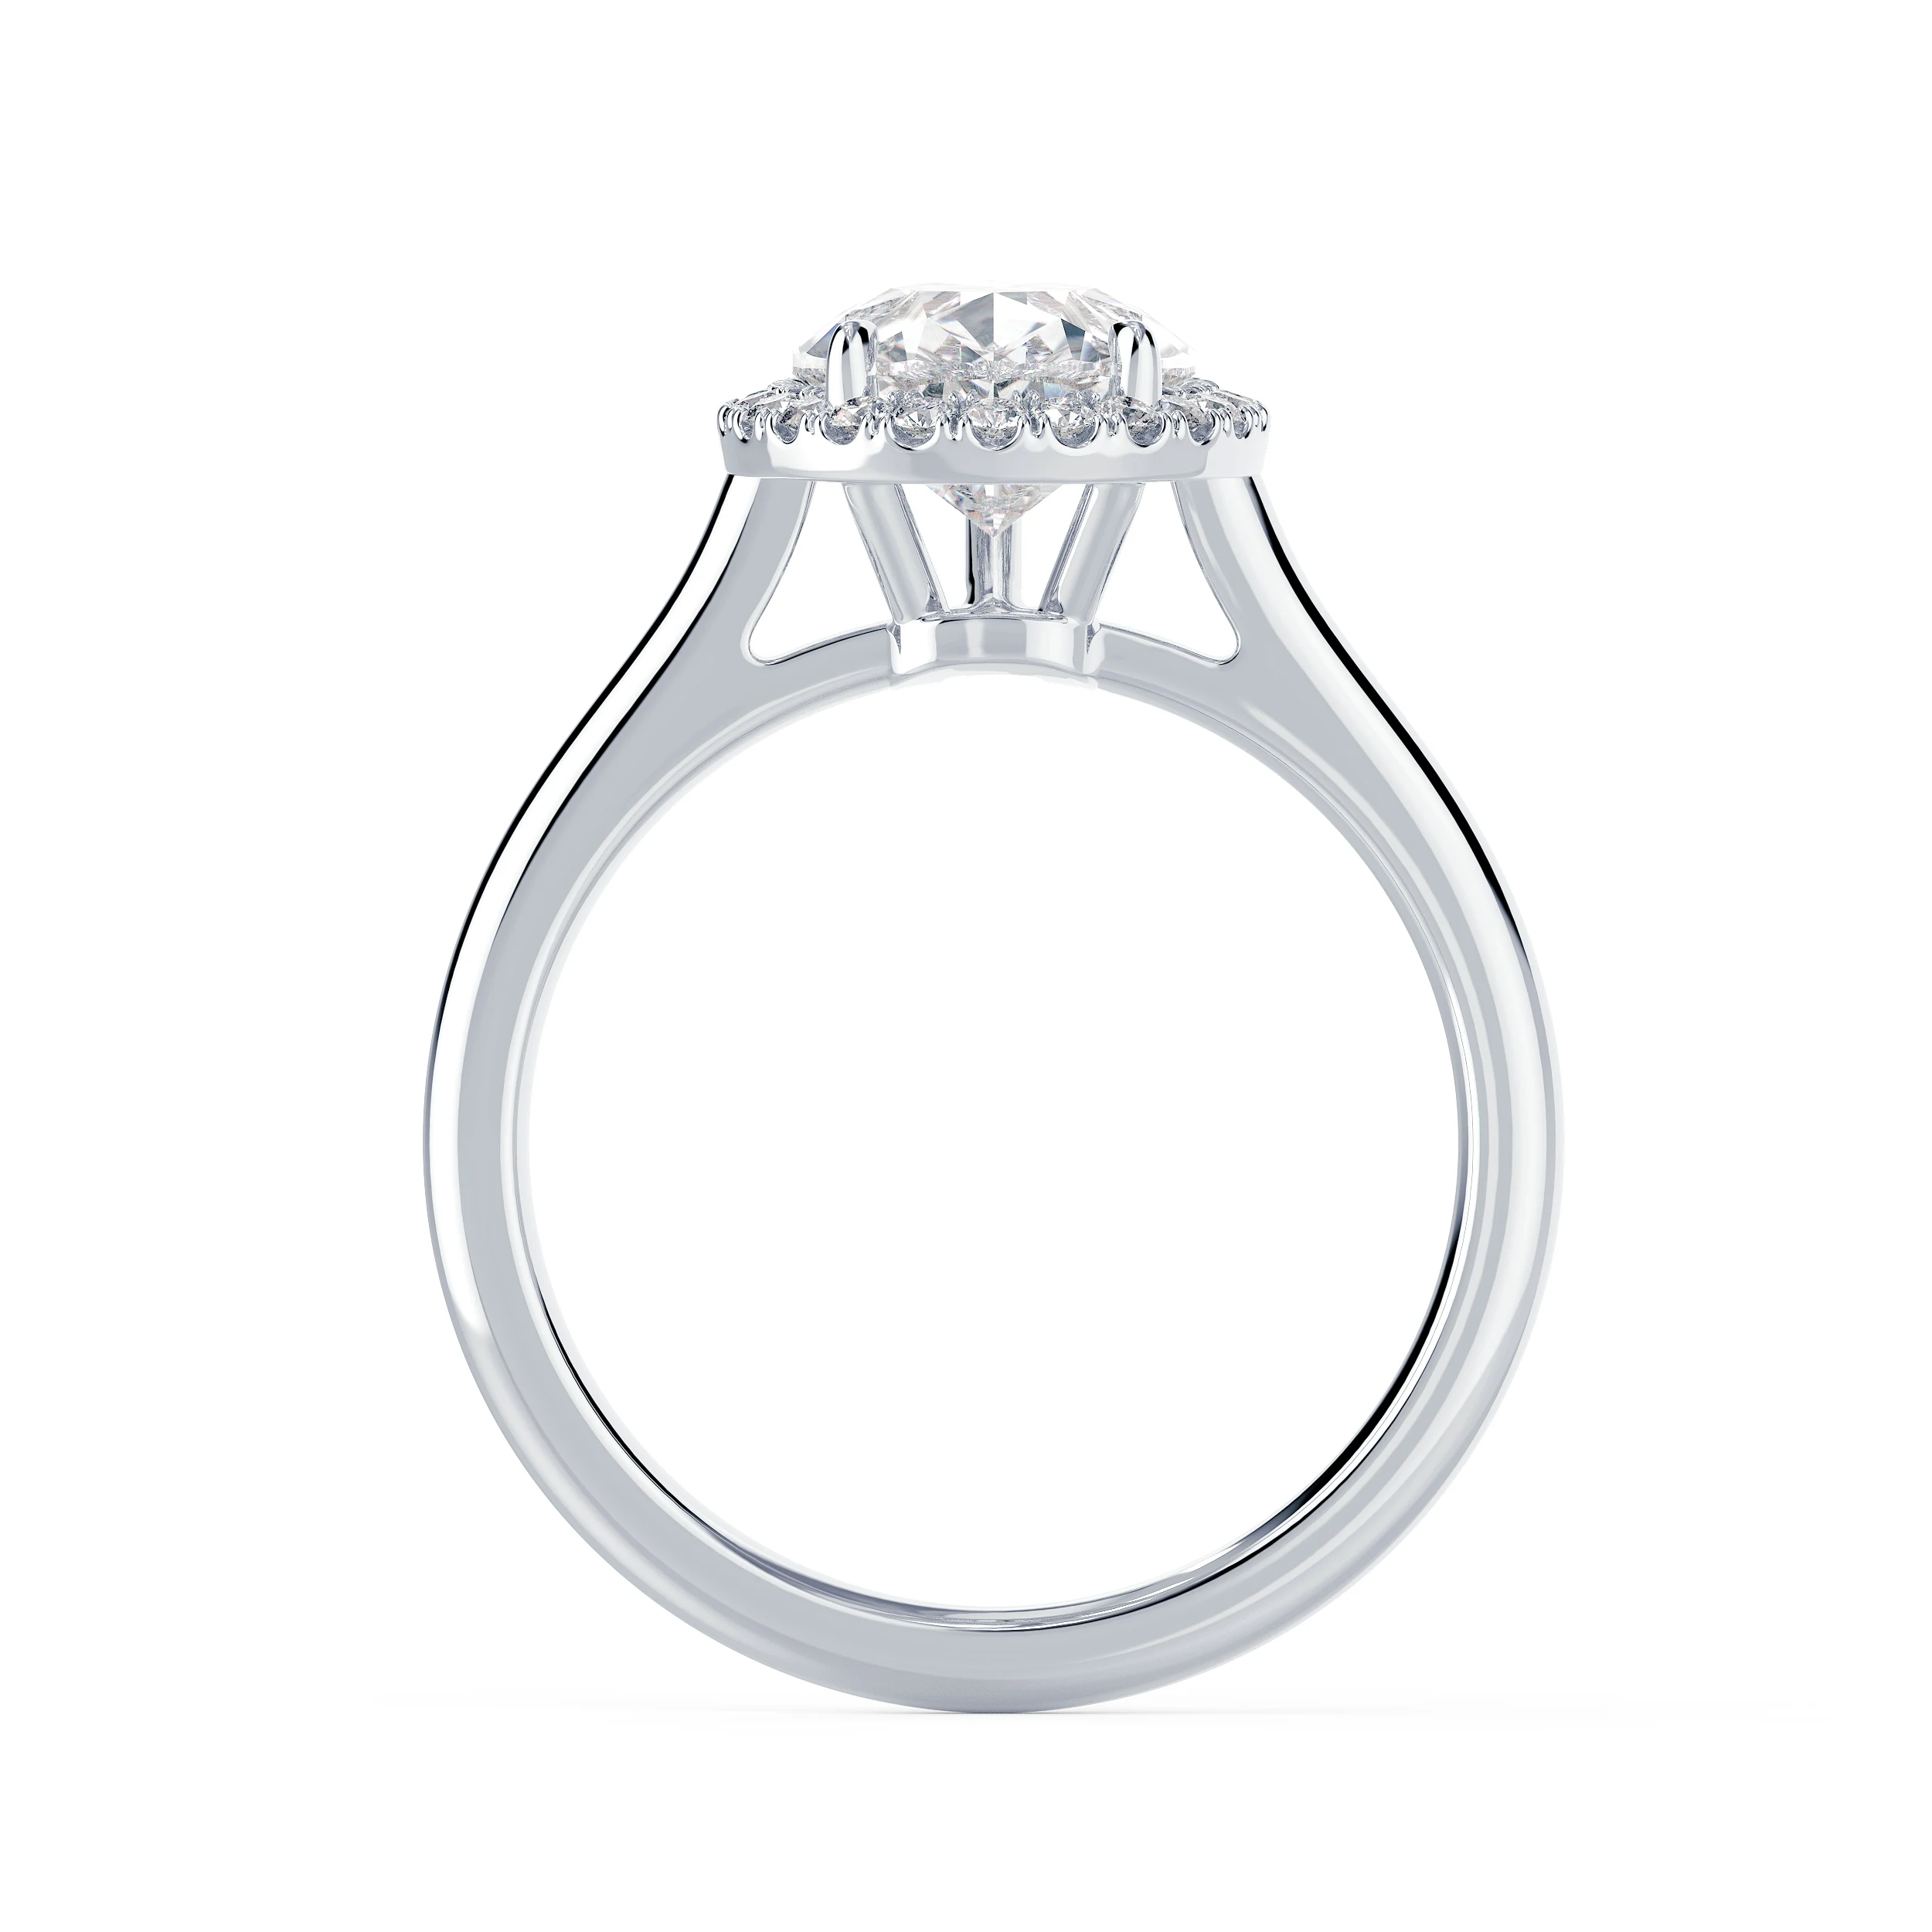 White Gold Pear Single Halo Diamond Engagement Ring featuring Lab Diamonds (Profile View)